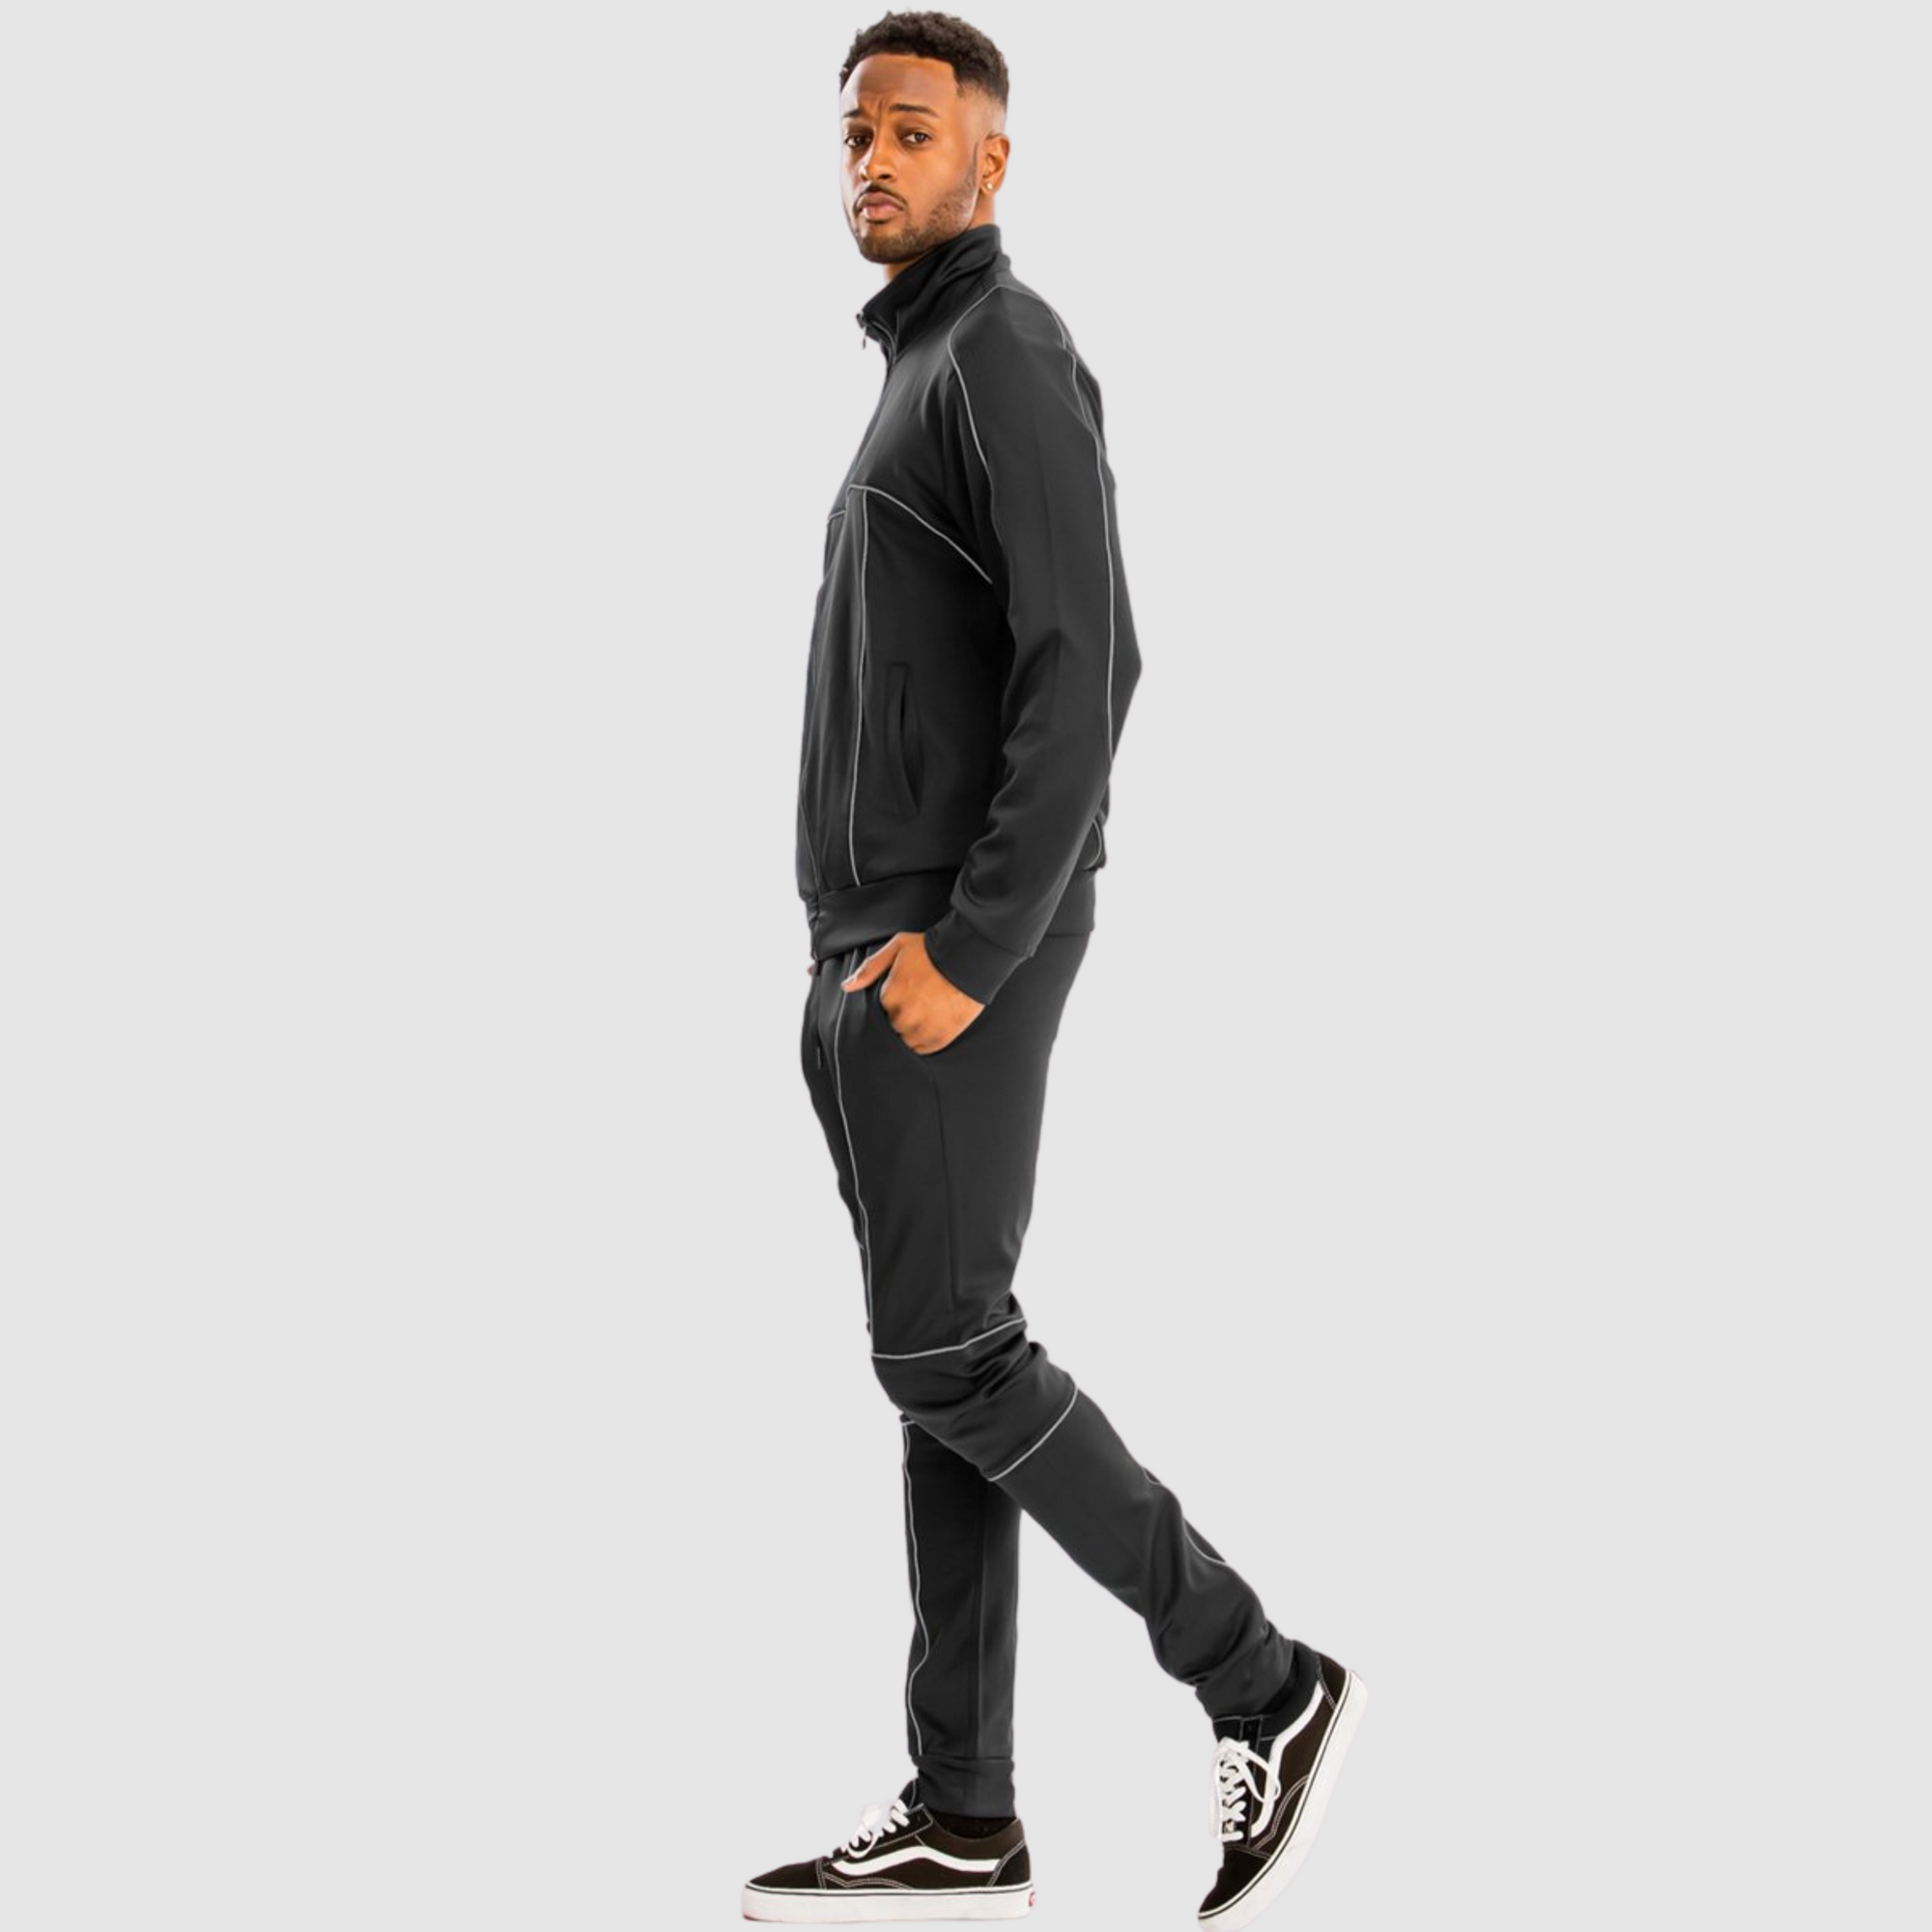 heny star men's clothing collection, henystar for men fashion